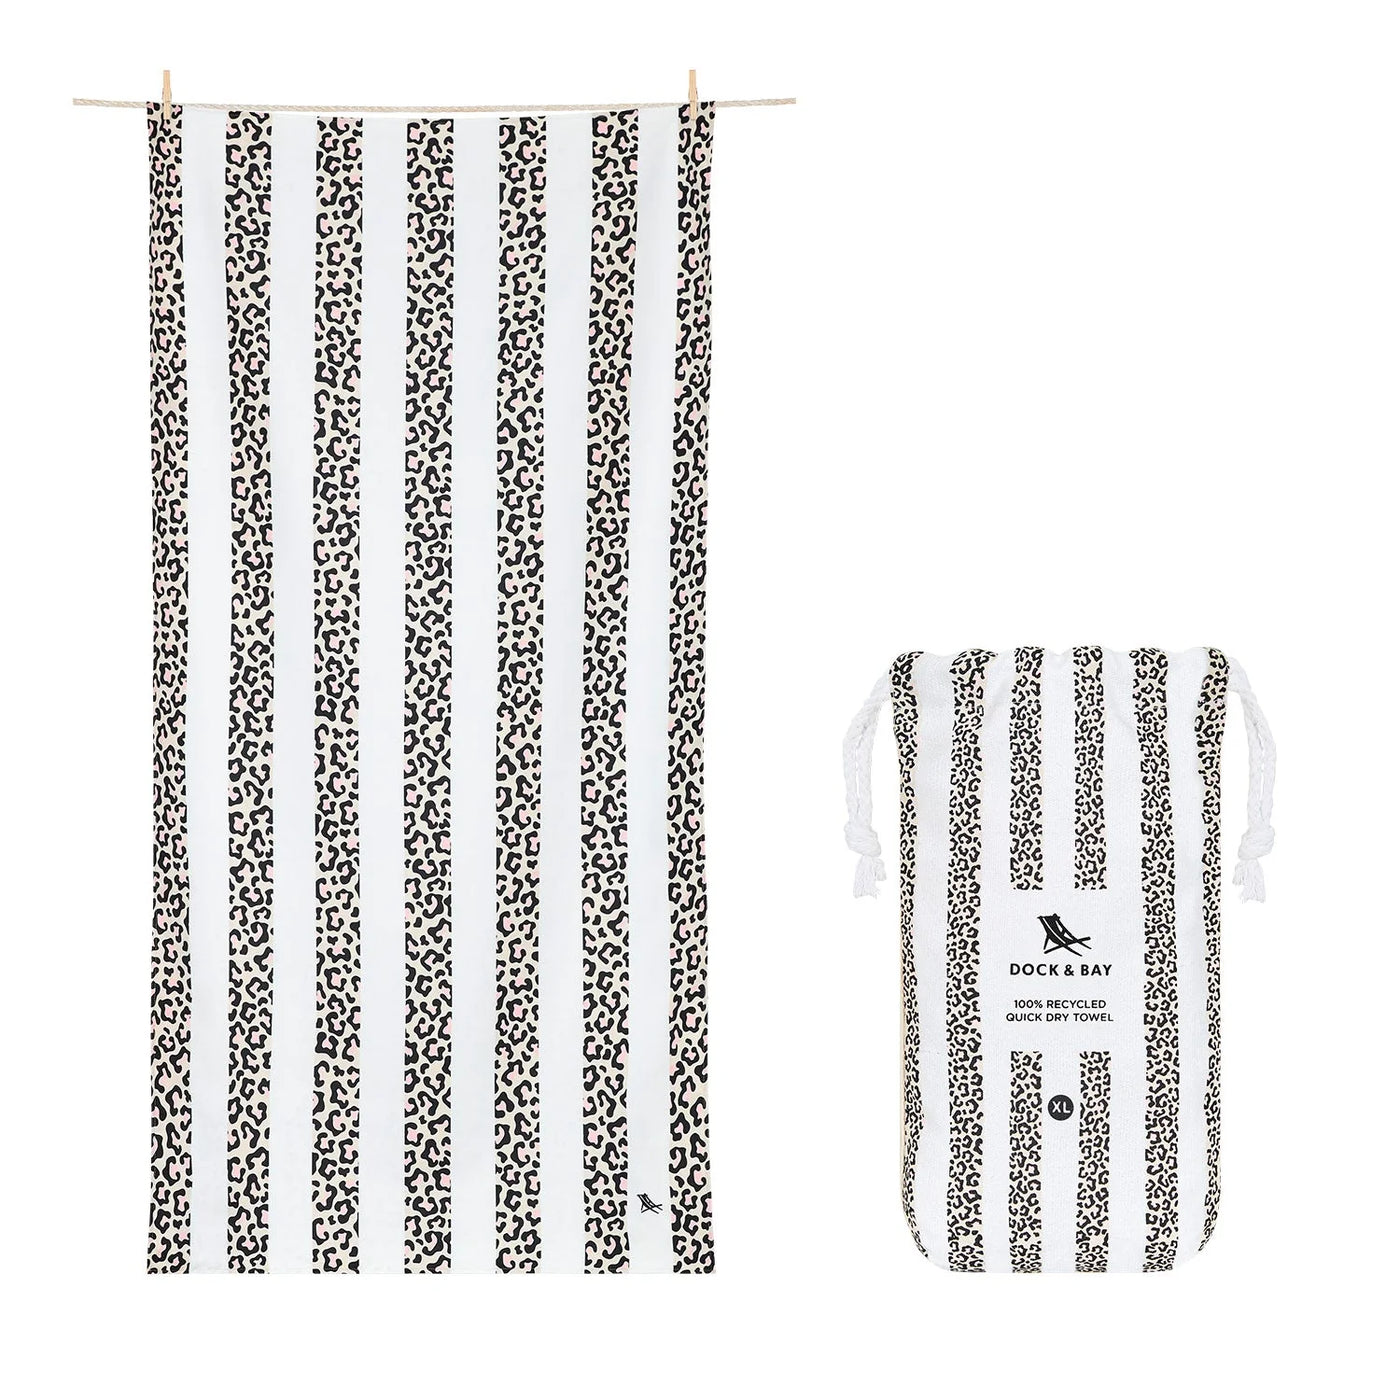 Dock & Bay Quick Dry Towels - Dashing Leopard